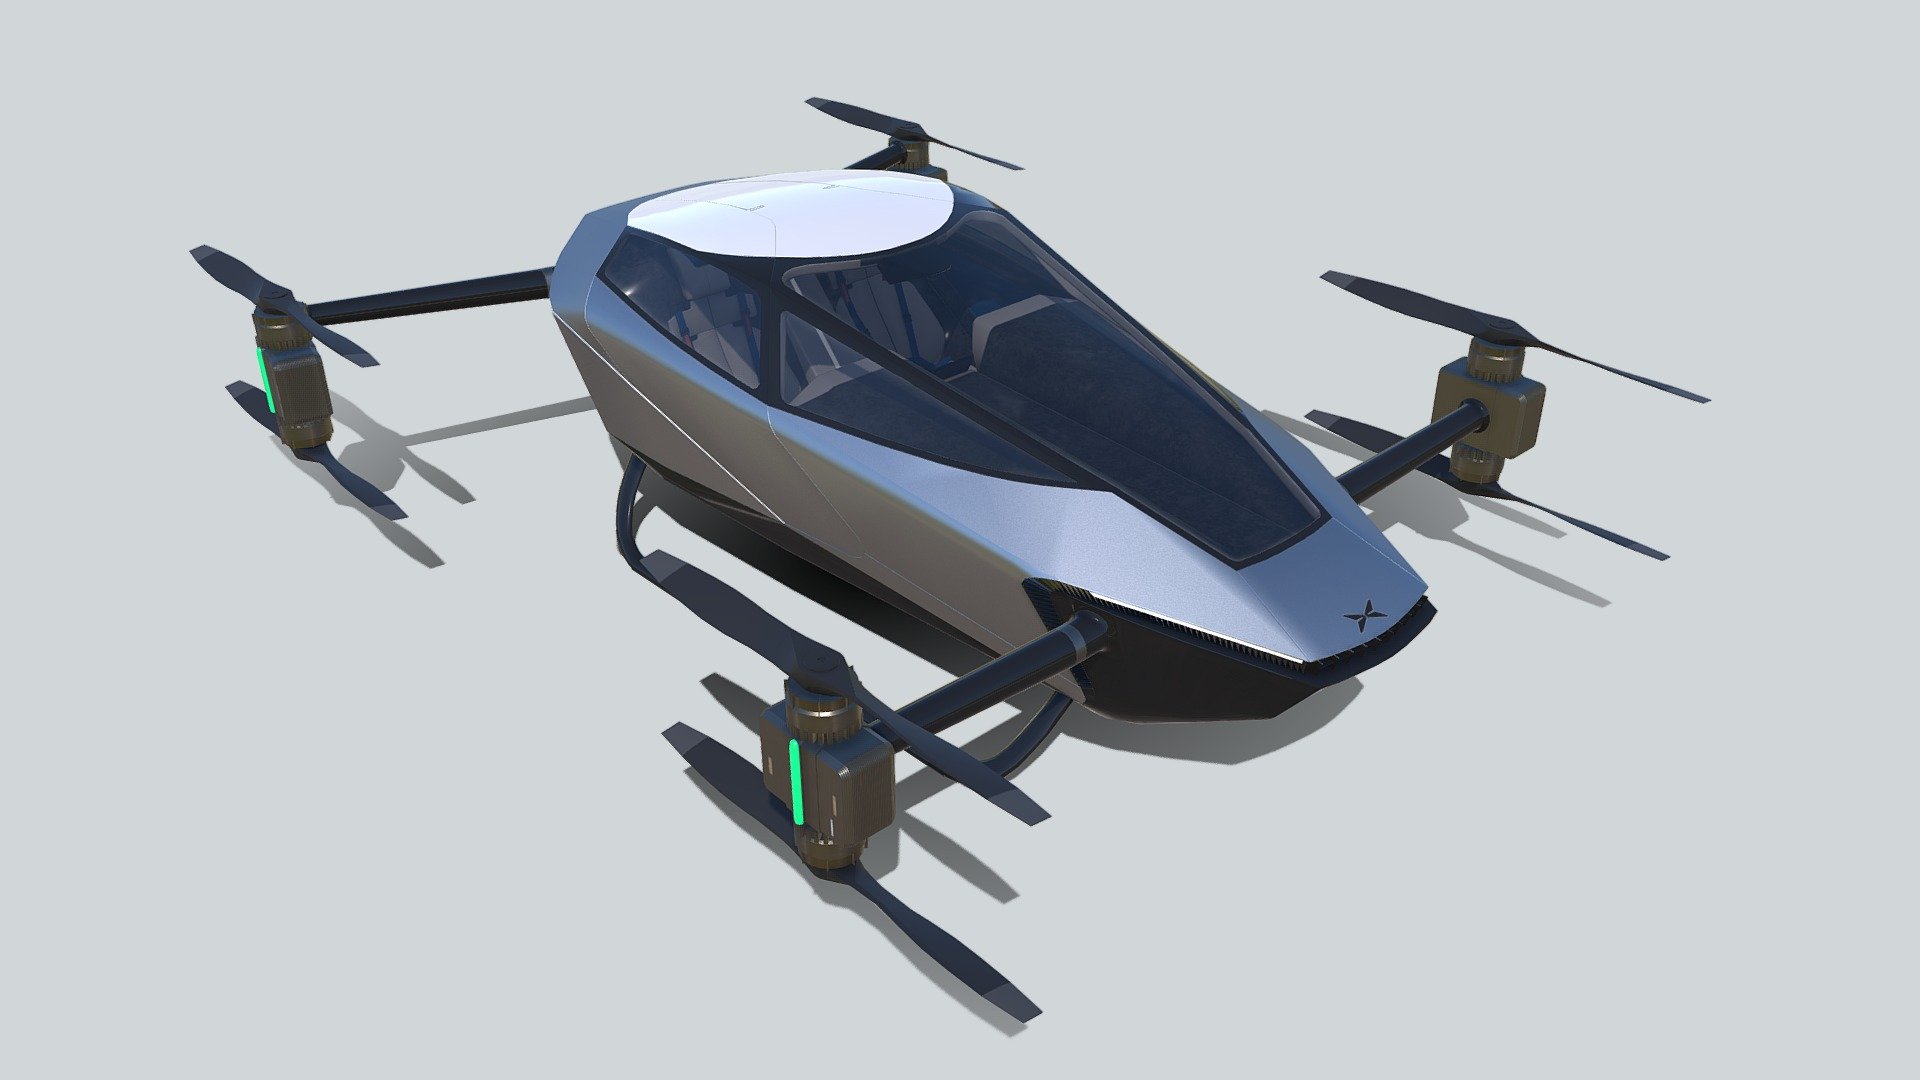 The XPeng X2 is a fifth generation eVTOL multicopter aircraft which holds two passengers, has eight propellers, eight electric motors, powered by batteries, has a maximum speed of 130 kp/h (81 mph) and a flight time of 35 minutes. The aircraft is flown autonomously, has fixed-skid type landing gear and has been made specifically for Urban Air Mobility (UAM) 3d model